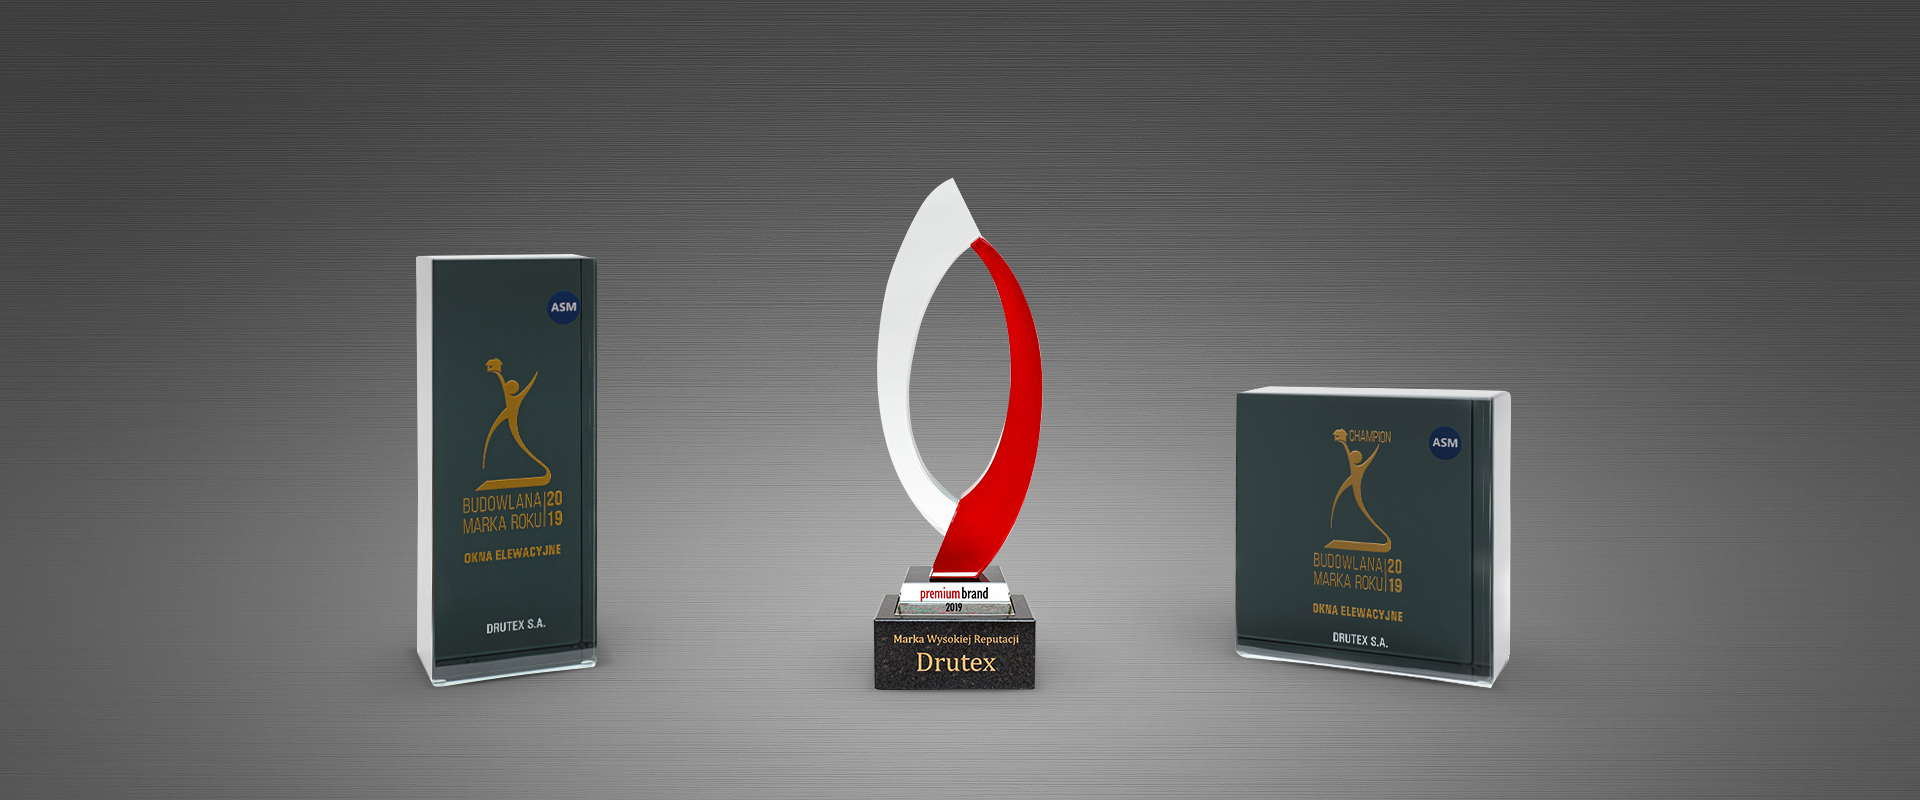 DRUTEX receives another award from clients